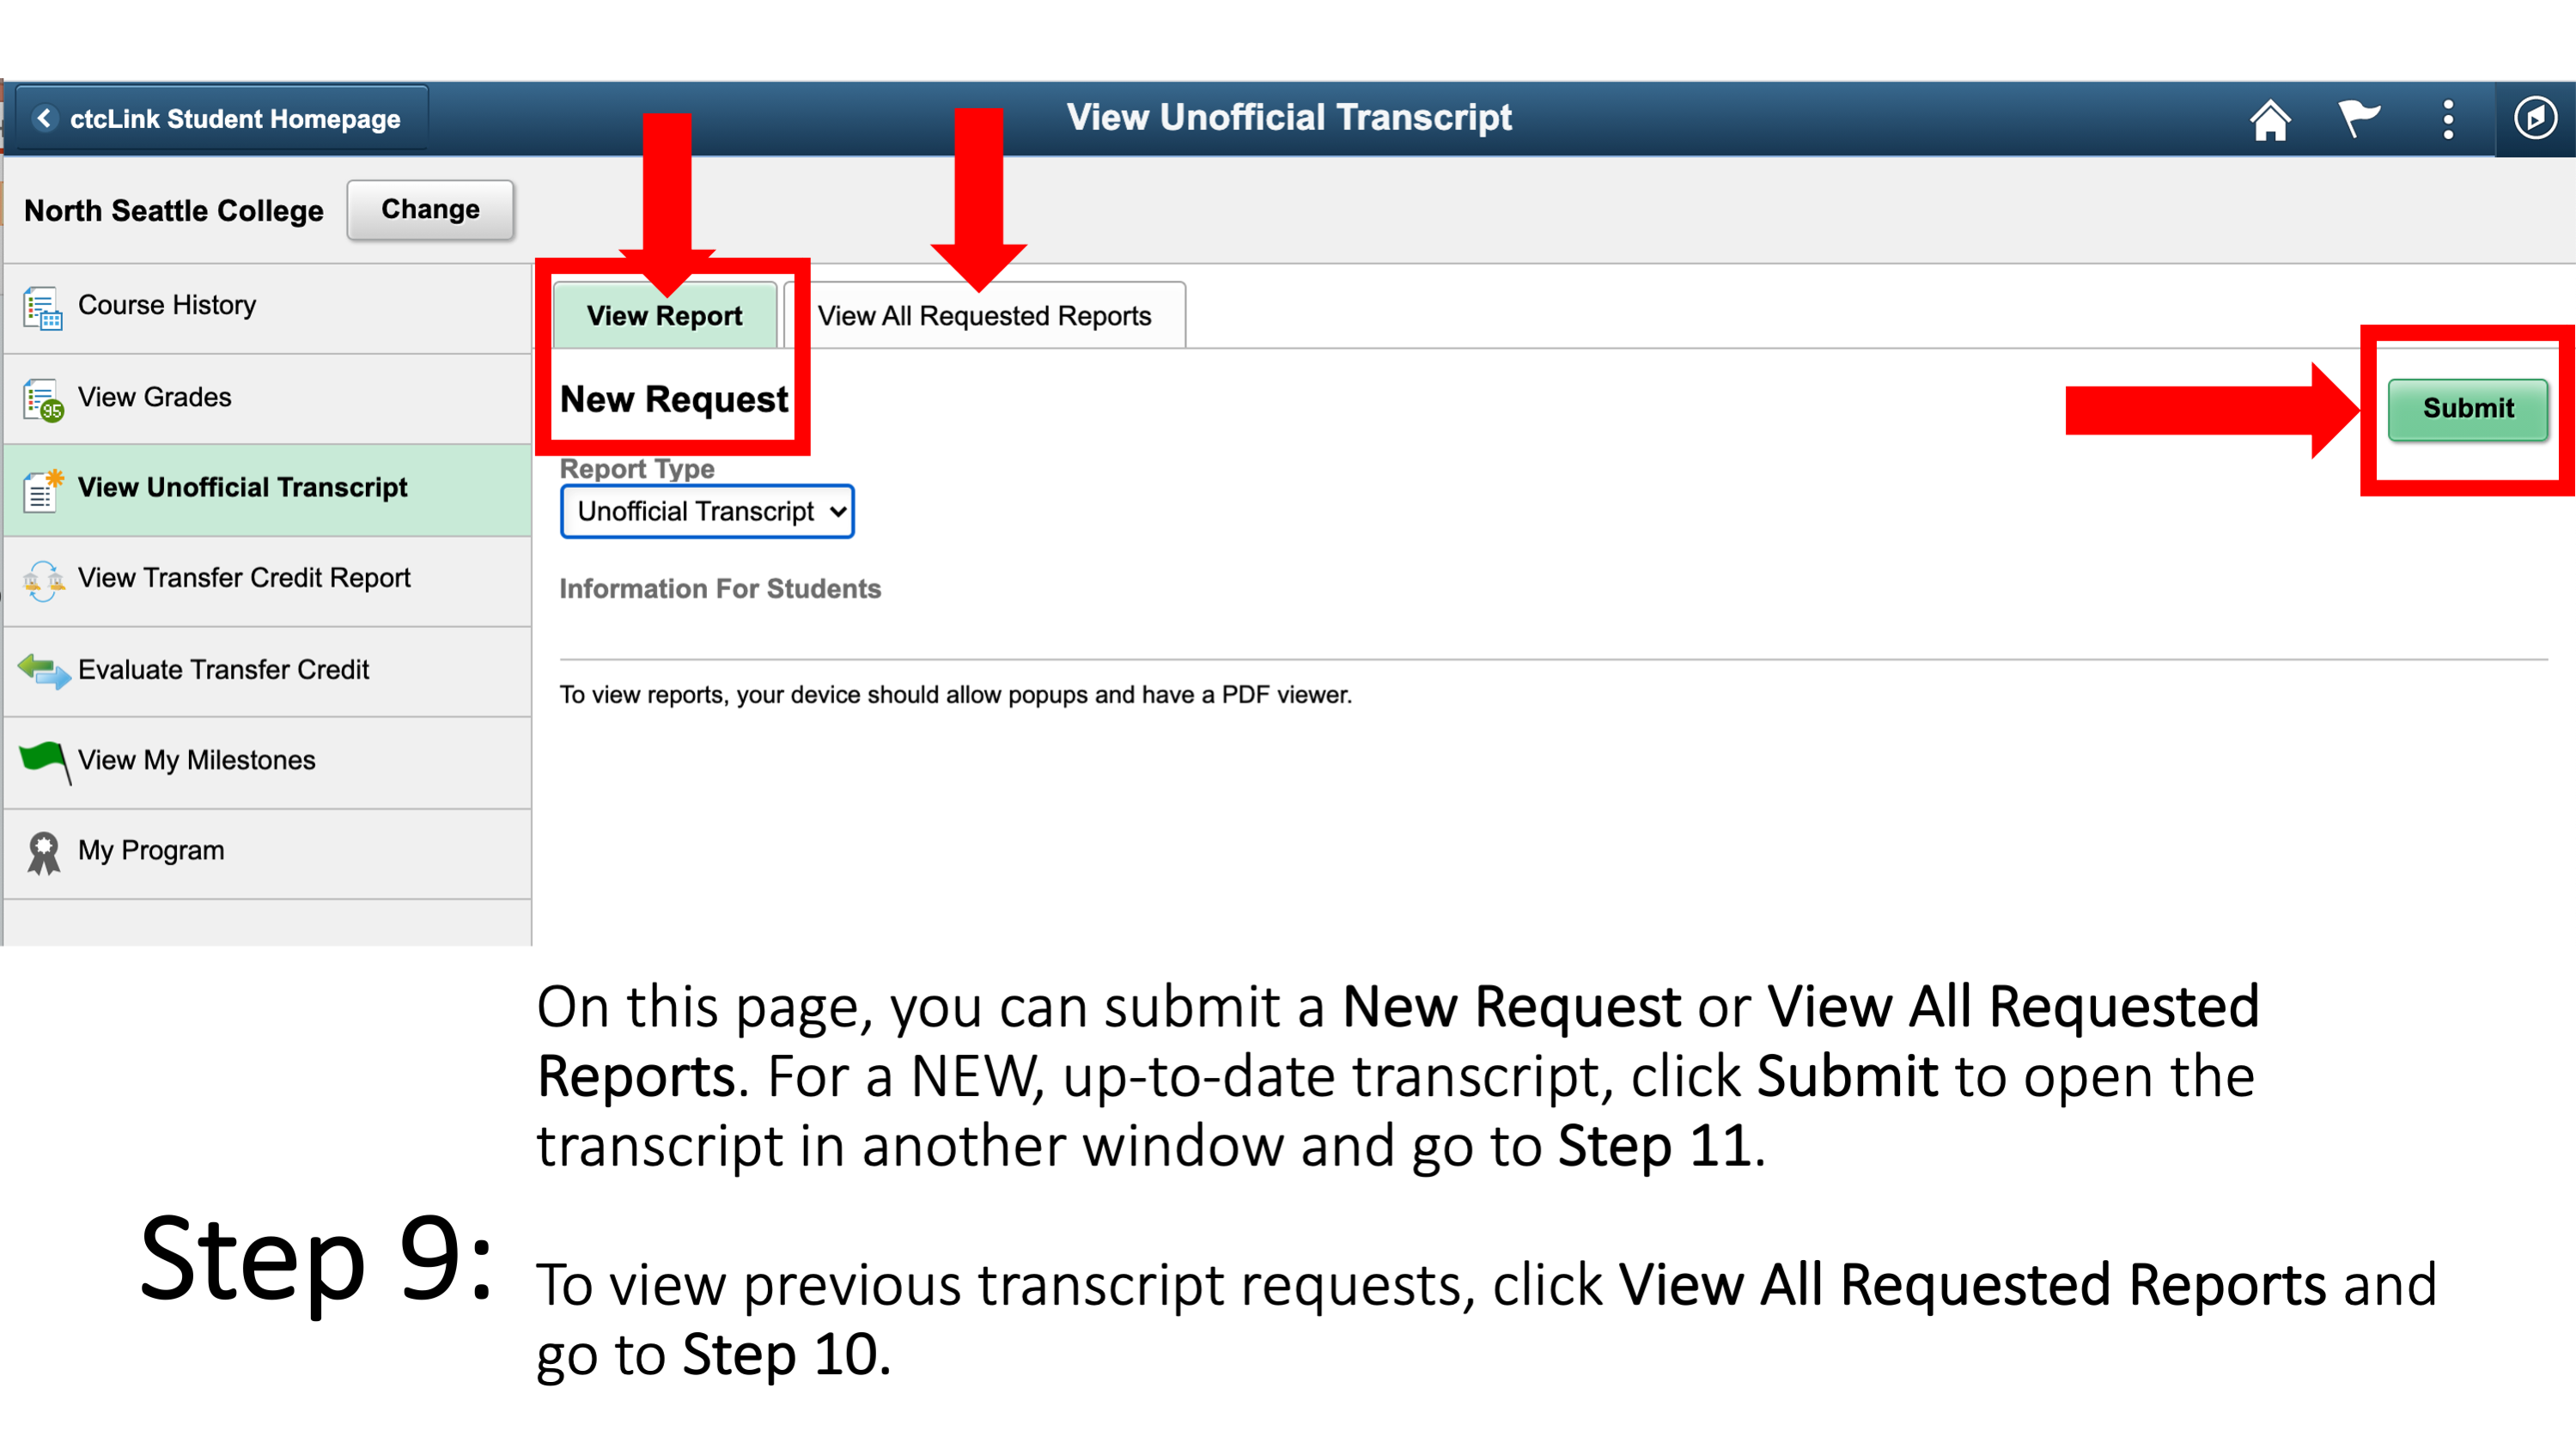 Step 9: On this page, you can submit a New Request or View All Requested Reports. For a NEW, up-to-date transcript, click Submit to open the transcript in another window and go to Step 11. To view previous transcript requests, click View All Requested Reports and go to Step 10. 